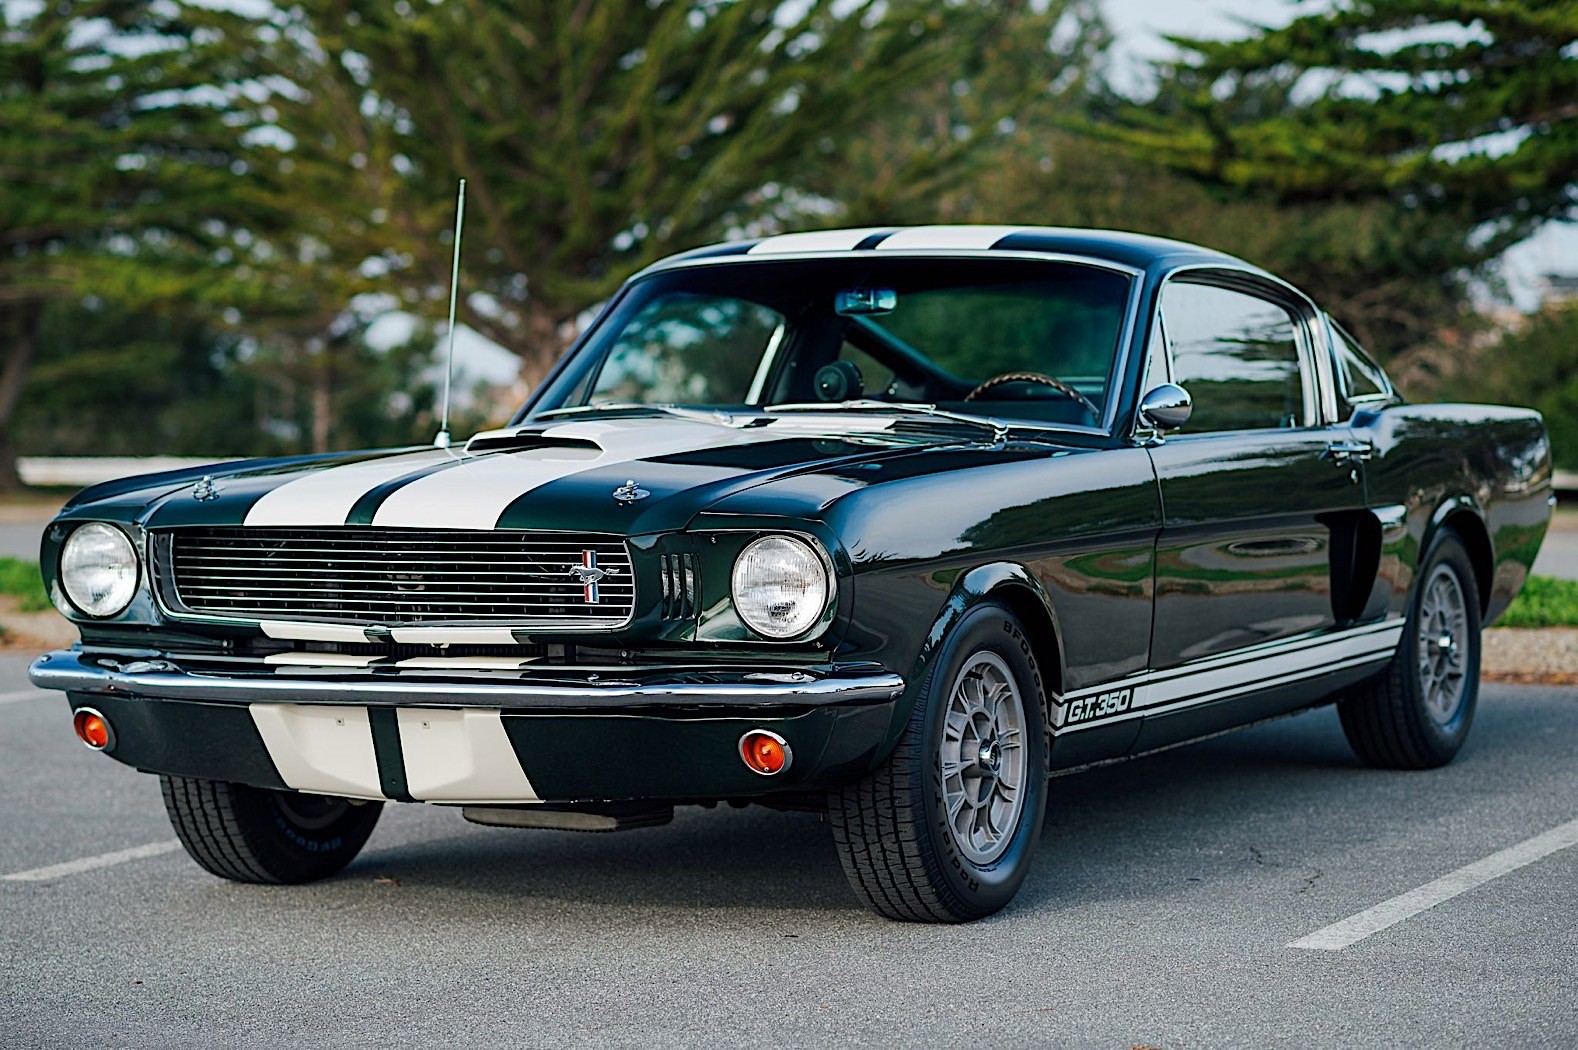 This 1966 Shelby Mustang Gt350 Had It Rough But Just Went For 140k